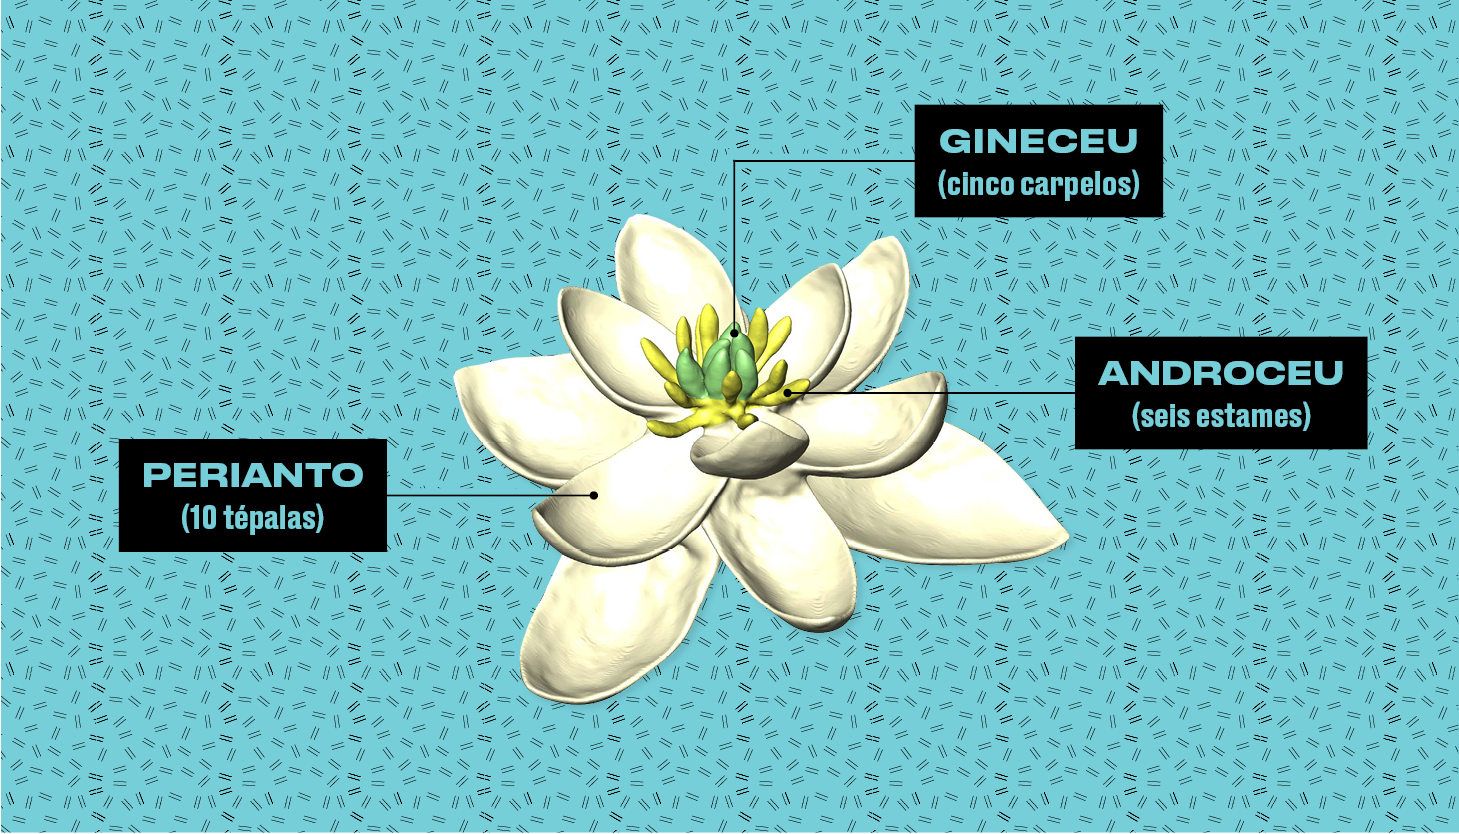 FONTE: THE ANCESTRAL FLOWER OF ANGIOSPERMS AND ITS EARLY DIVERSIFICATION (Foto: Arte Galileu)